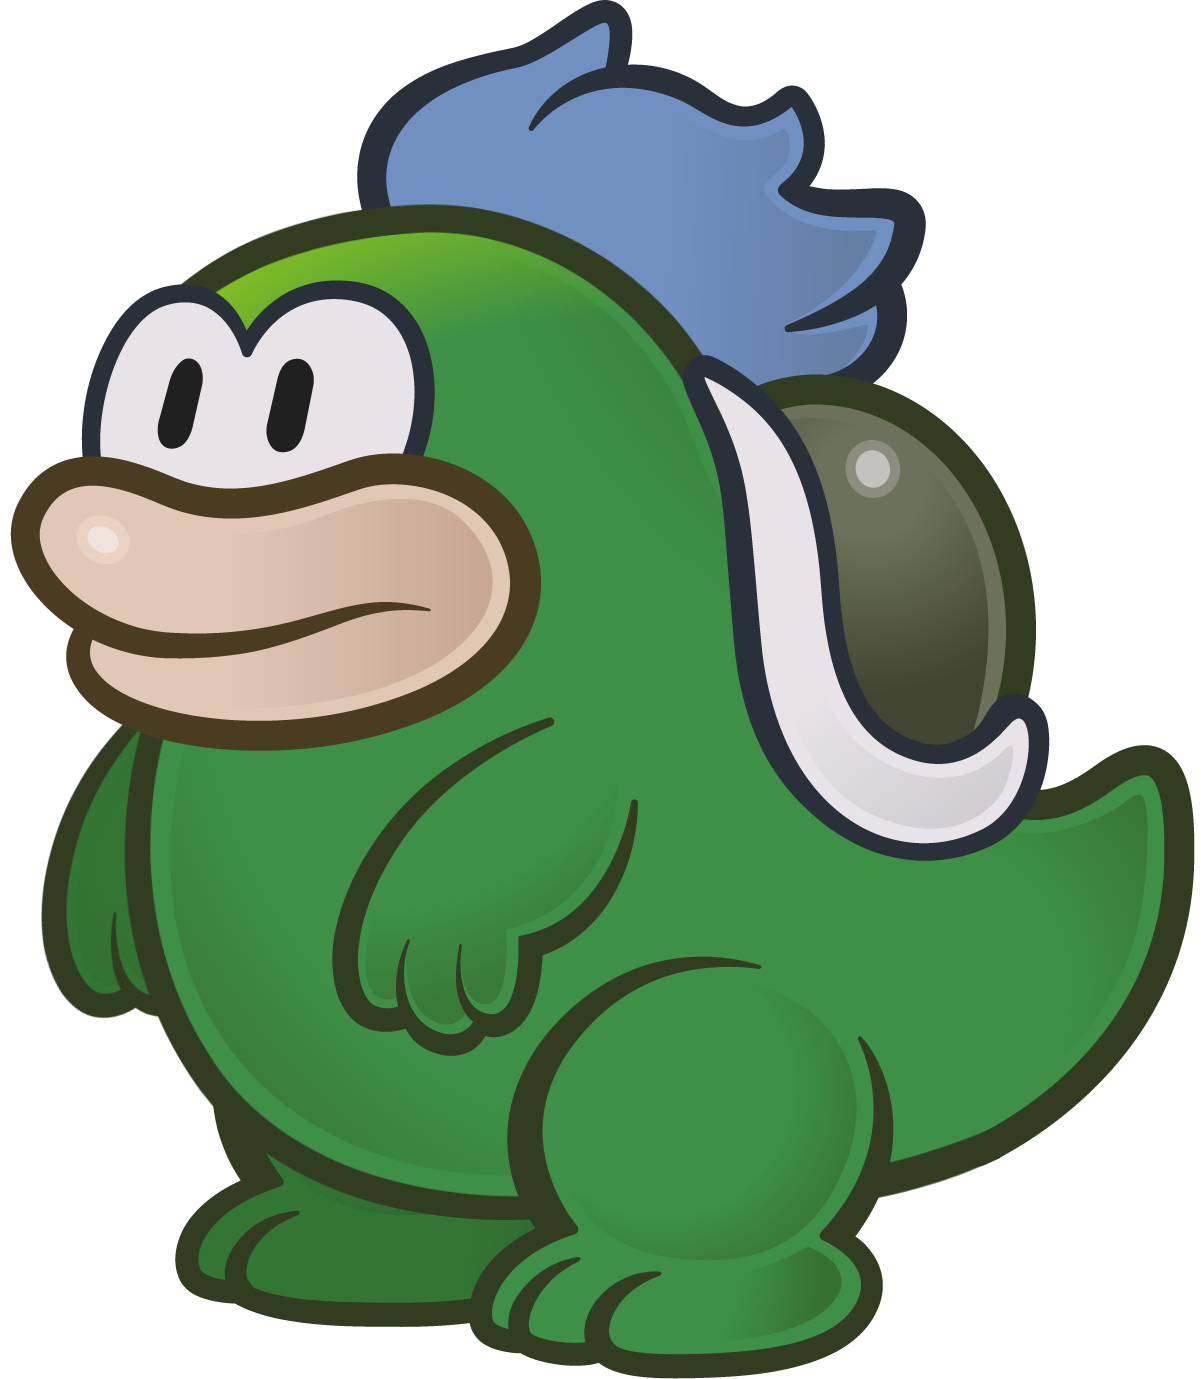 Spike - Classic Paper Mario Style (HD) by Fawfulthegreat64 on DeviantArt